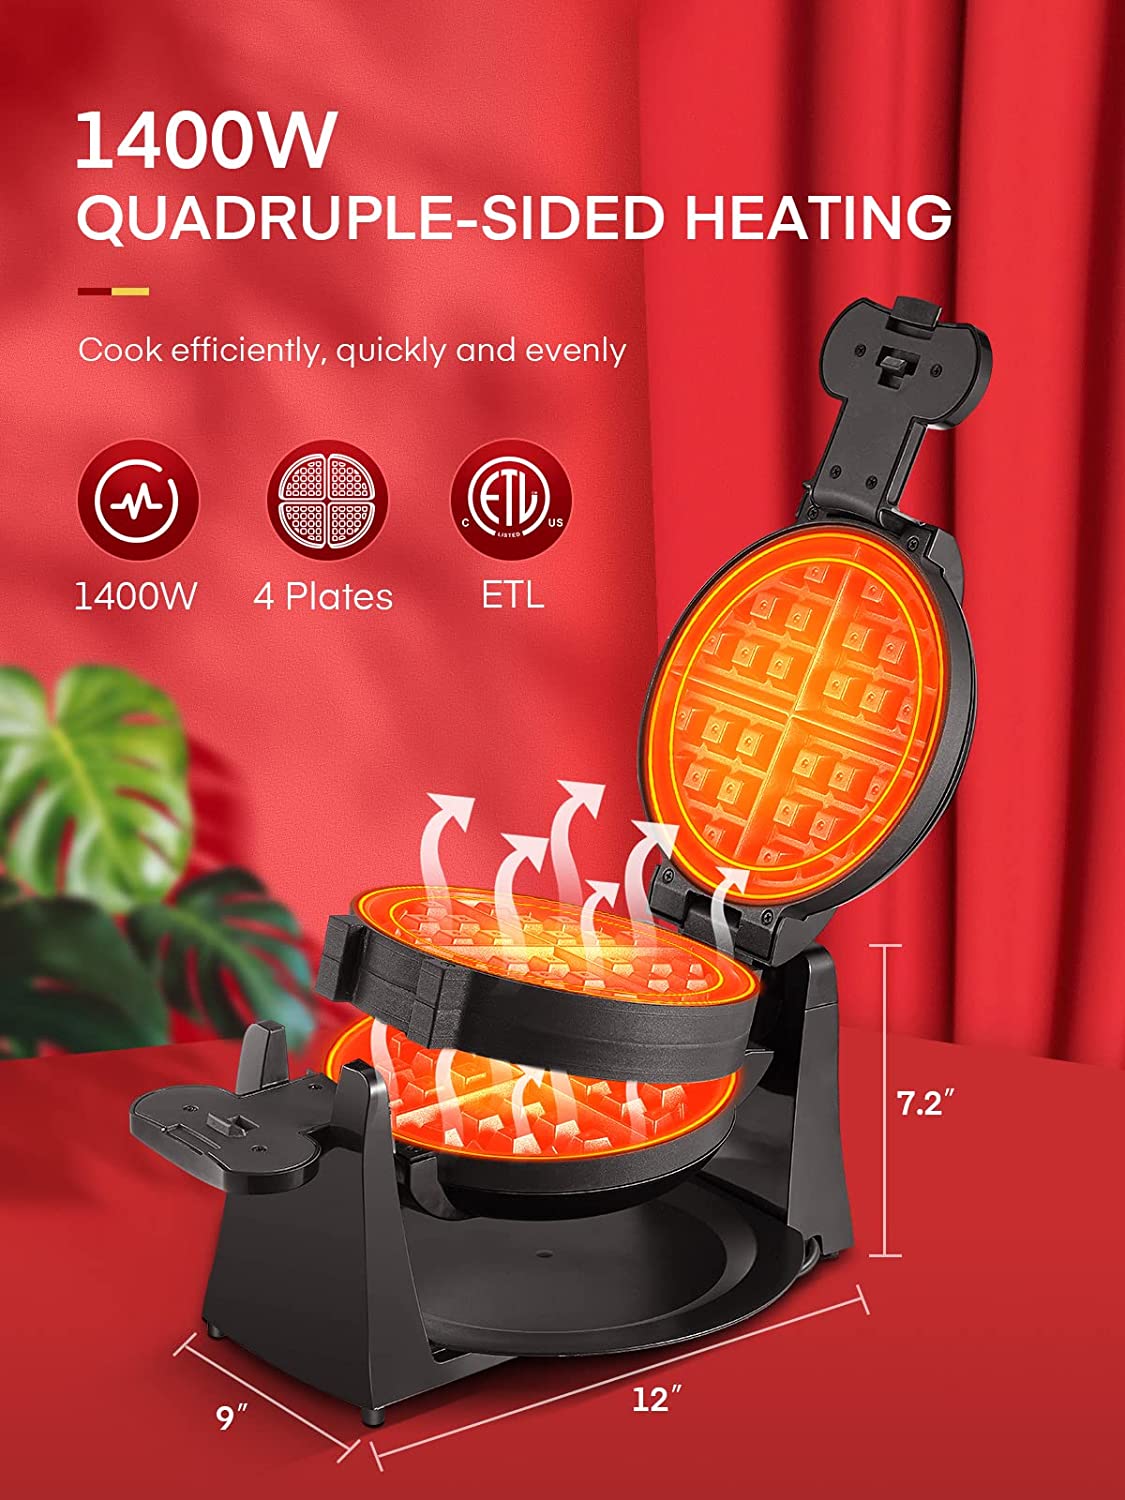 1400w quadruple-sided heating, Waffle Maker, Belgian Waffle Maker Iron 180° Flip Double Waffle, 8 Slices, Rotating & Nonstick Plates, Removable Drip Tray, Cool Touch Handle, Black, 1400W